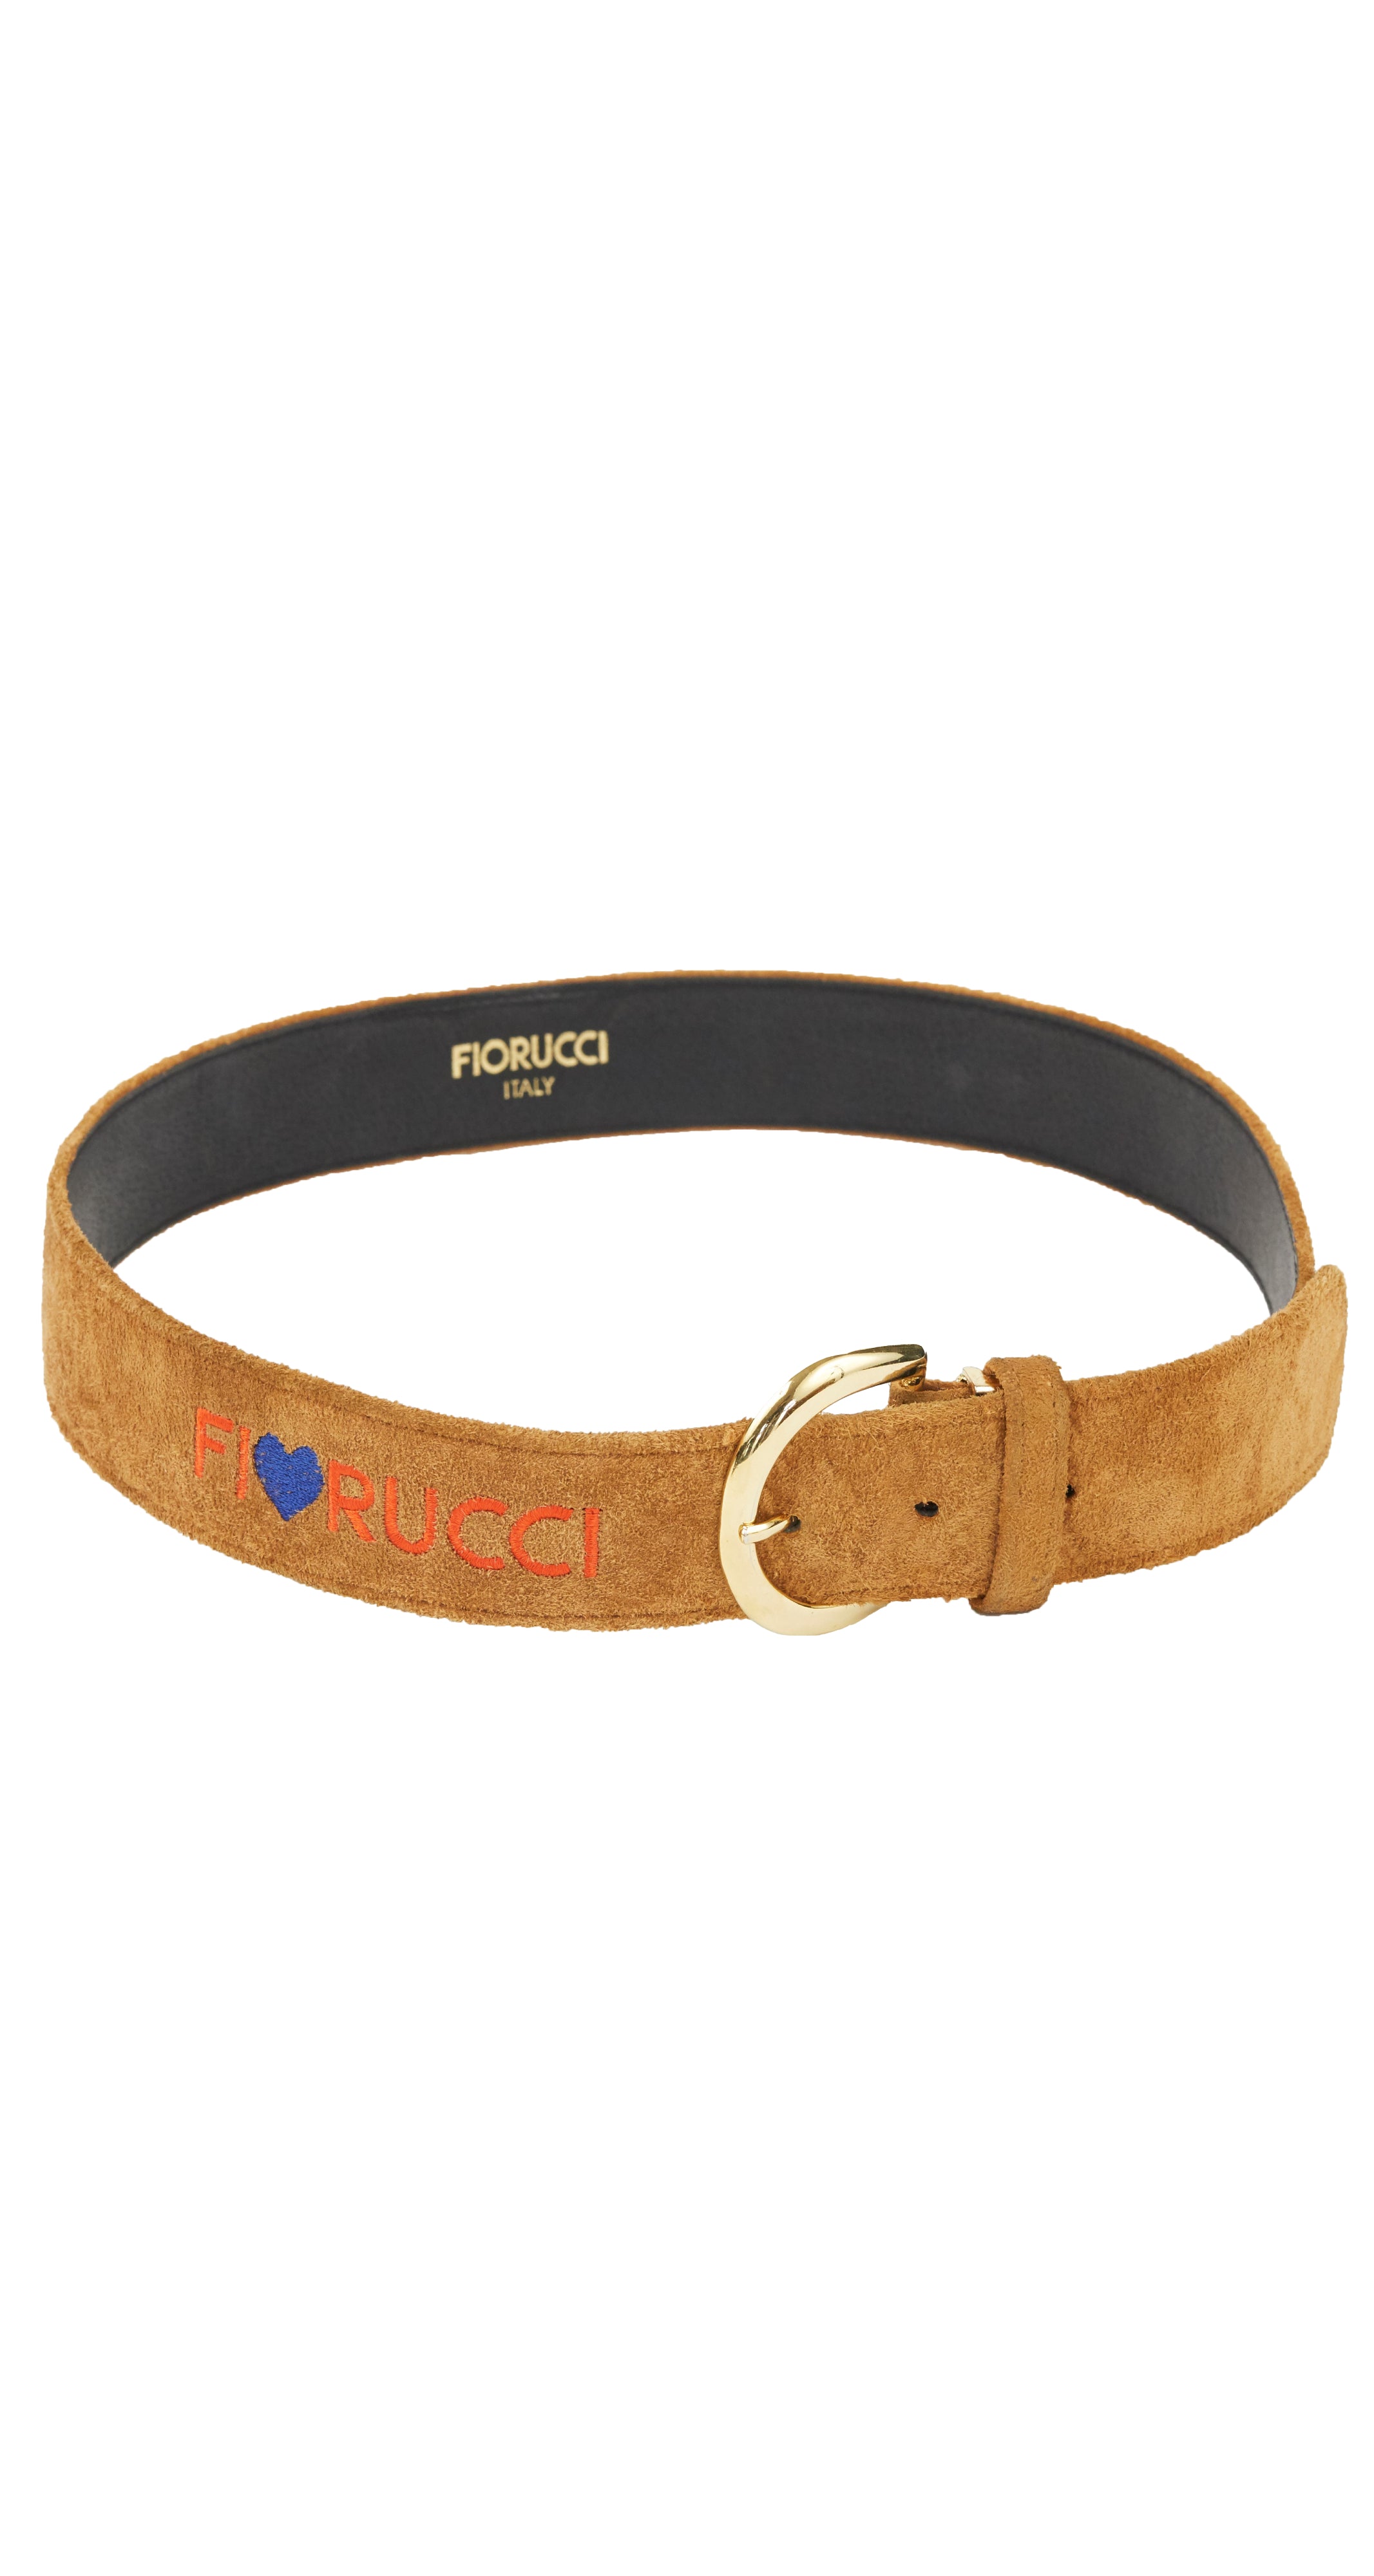 1980s "FI♥RUCCI" Embroidered Suede Belt